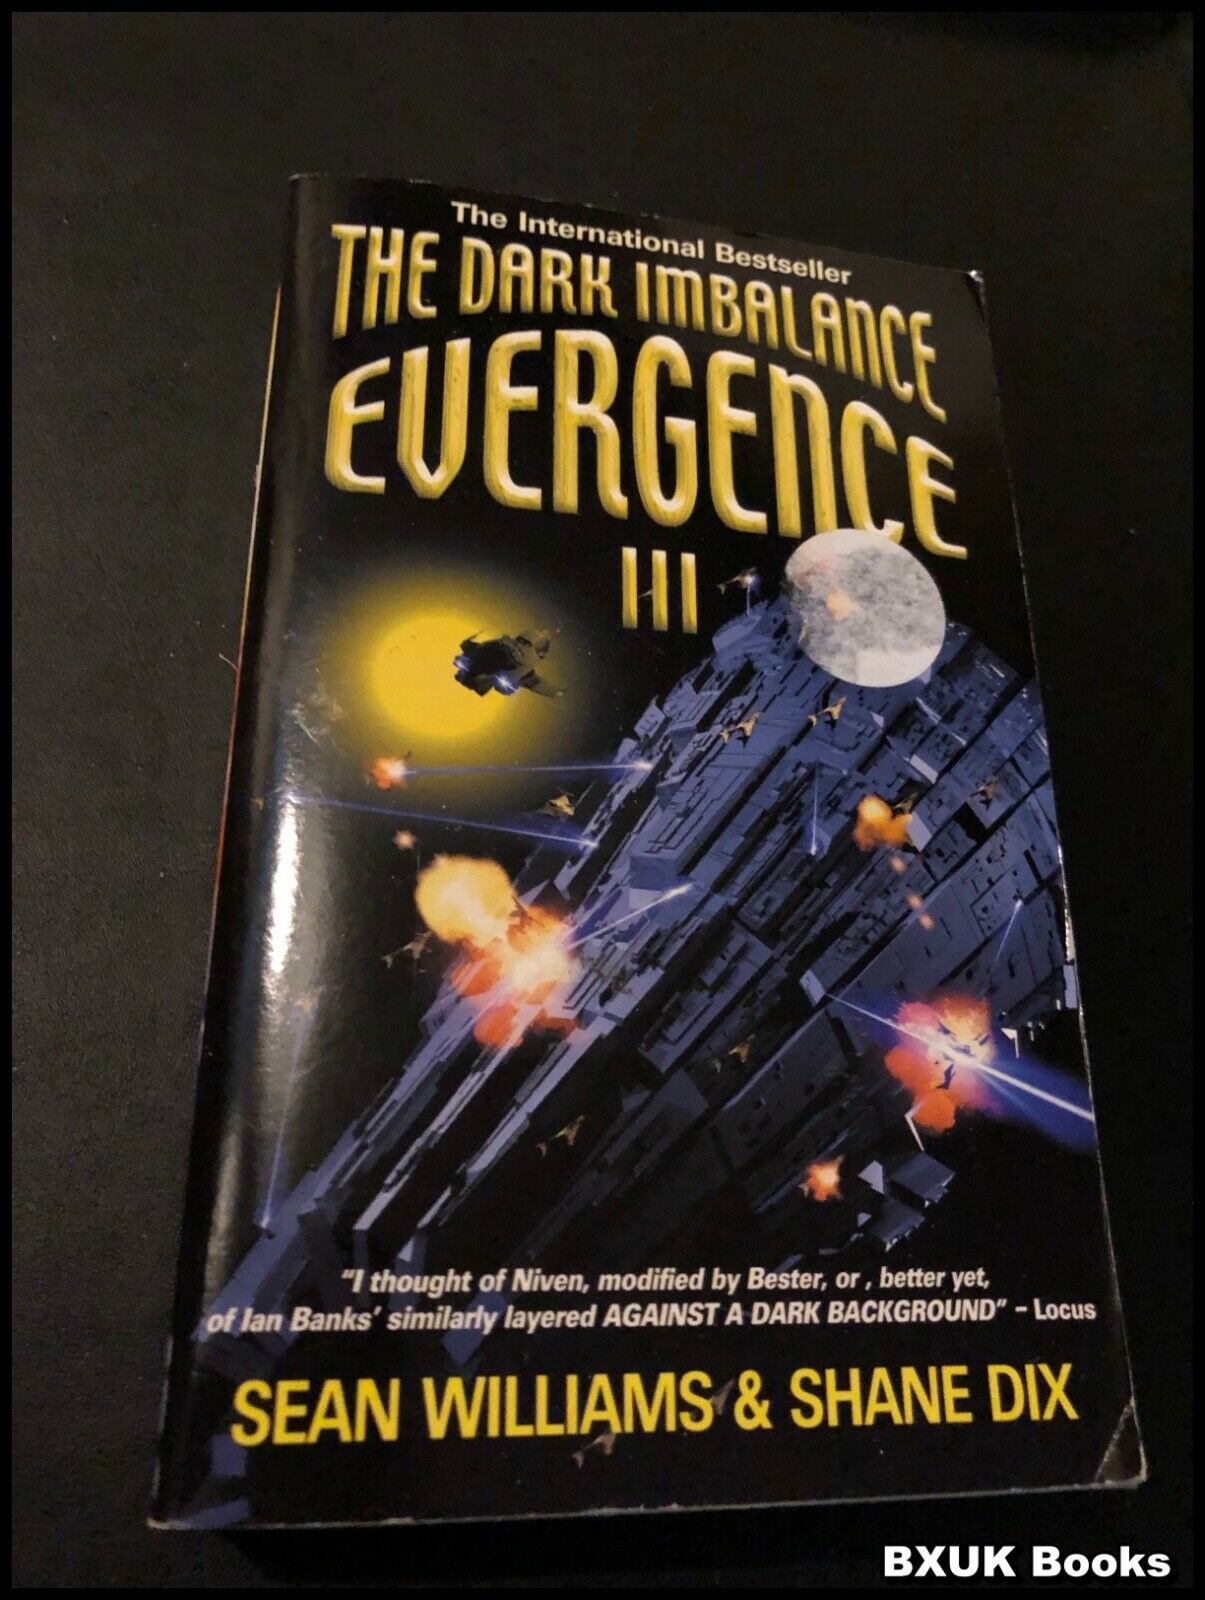 Evergence 3: The Dark Imbalance by Sean Williams, Shane Dix (Paperback, 2001)